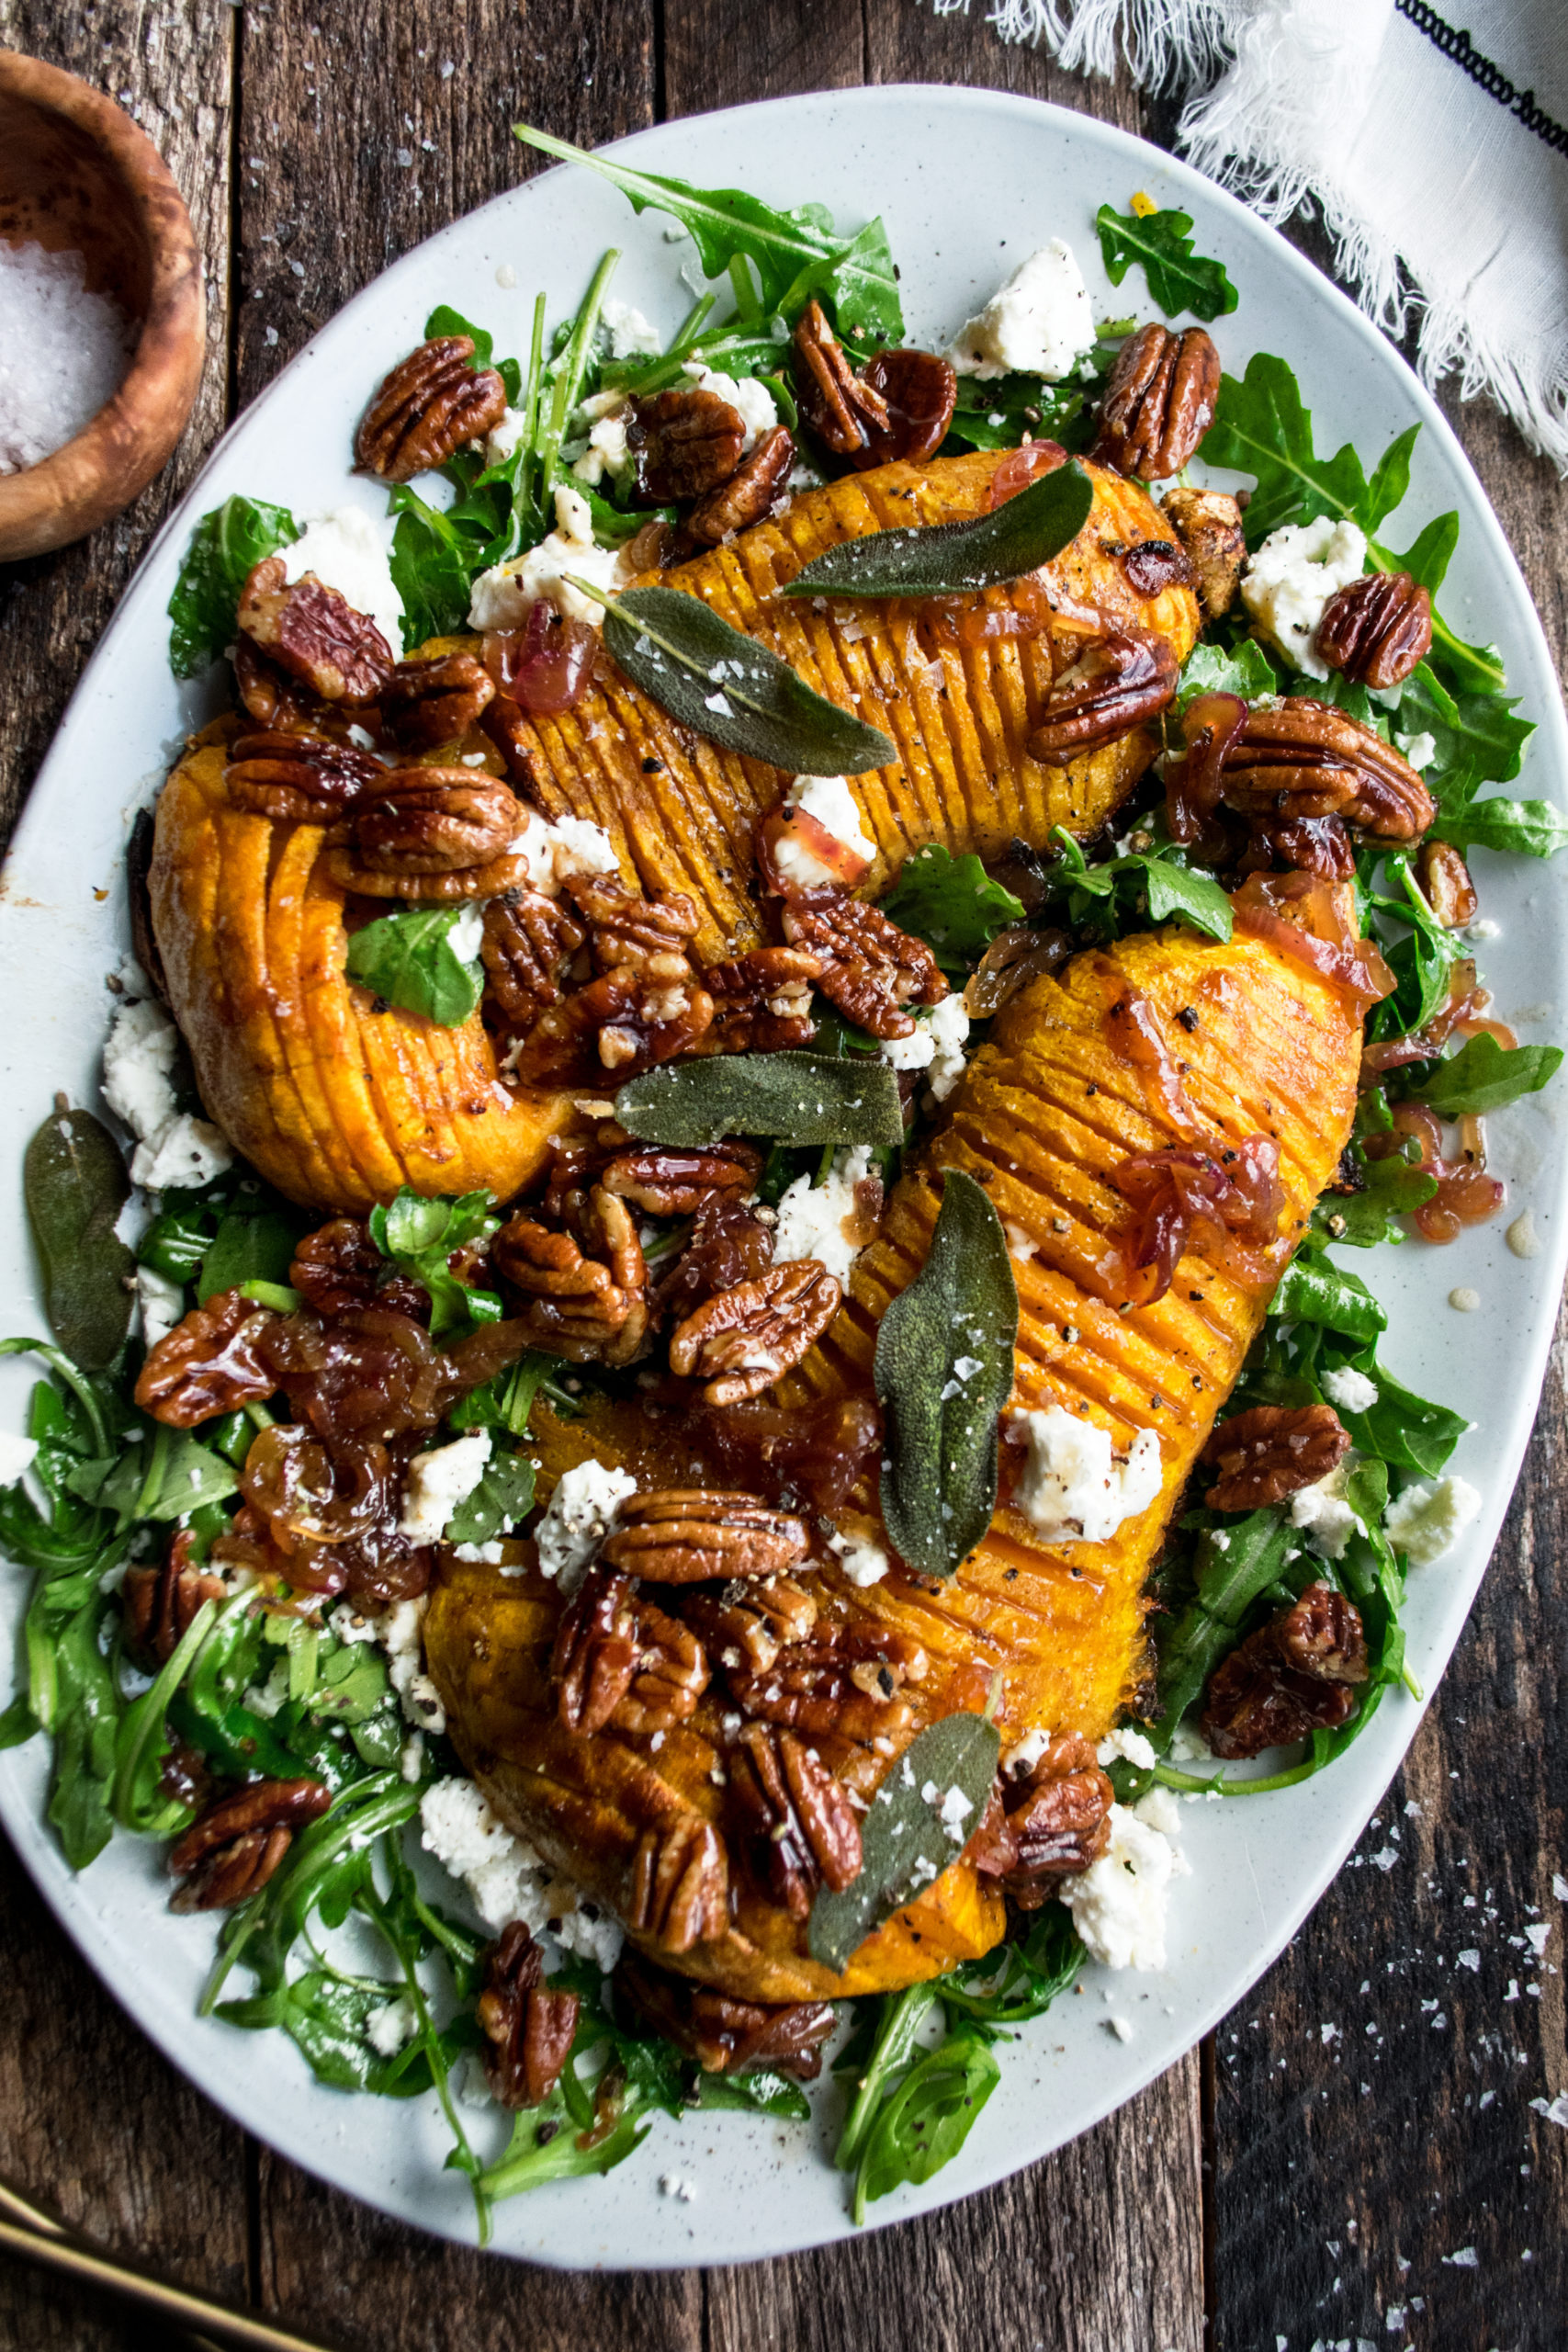 Roasted Butternut Squash with Maple Browned Butter